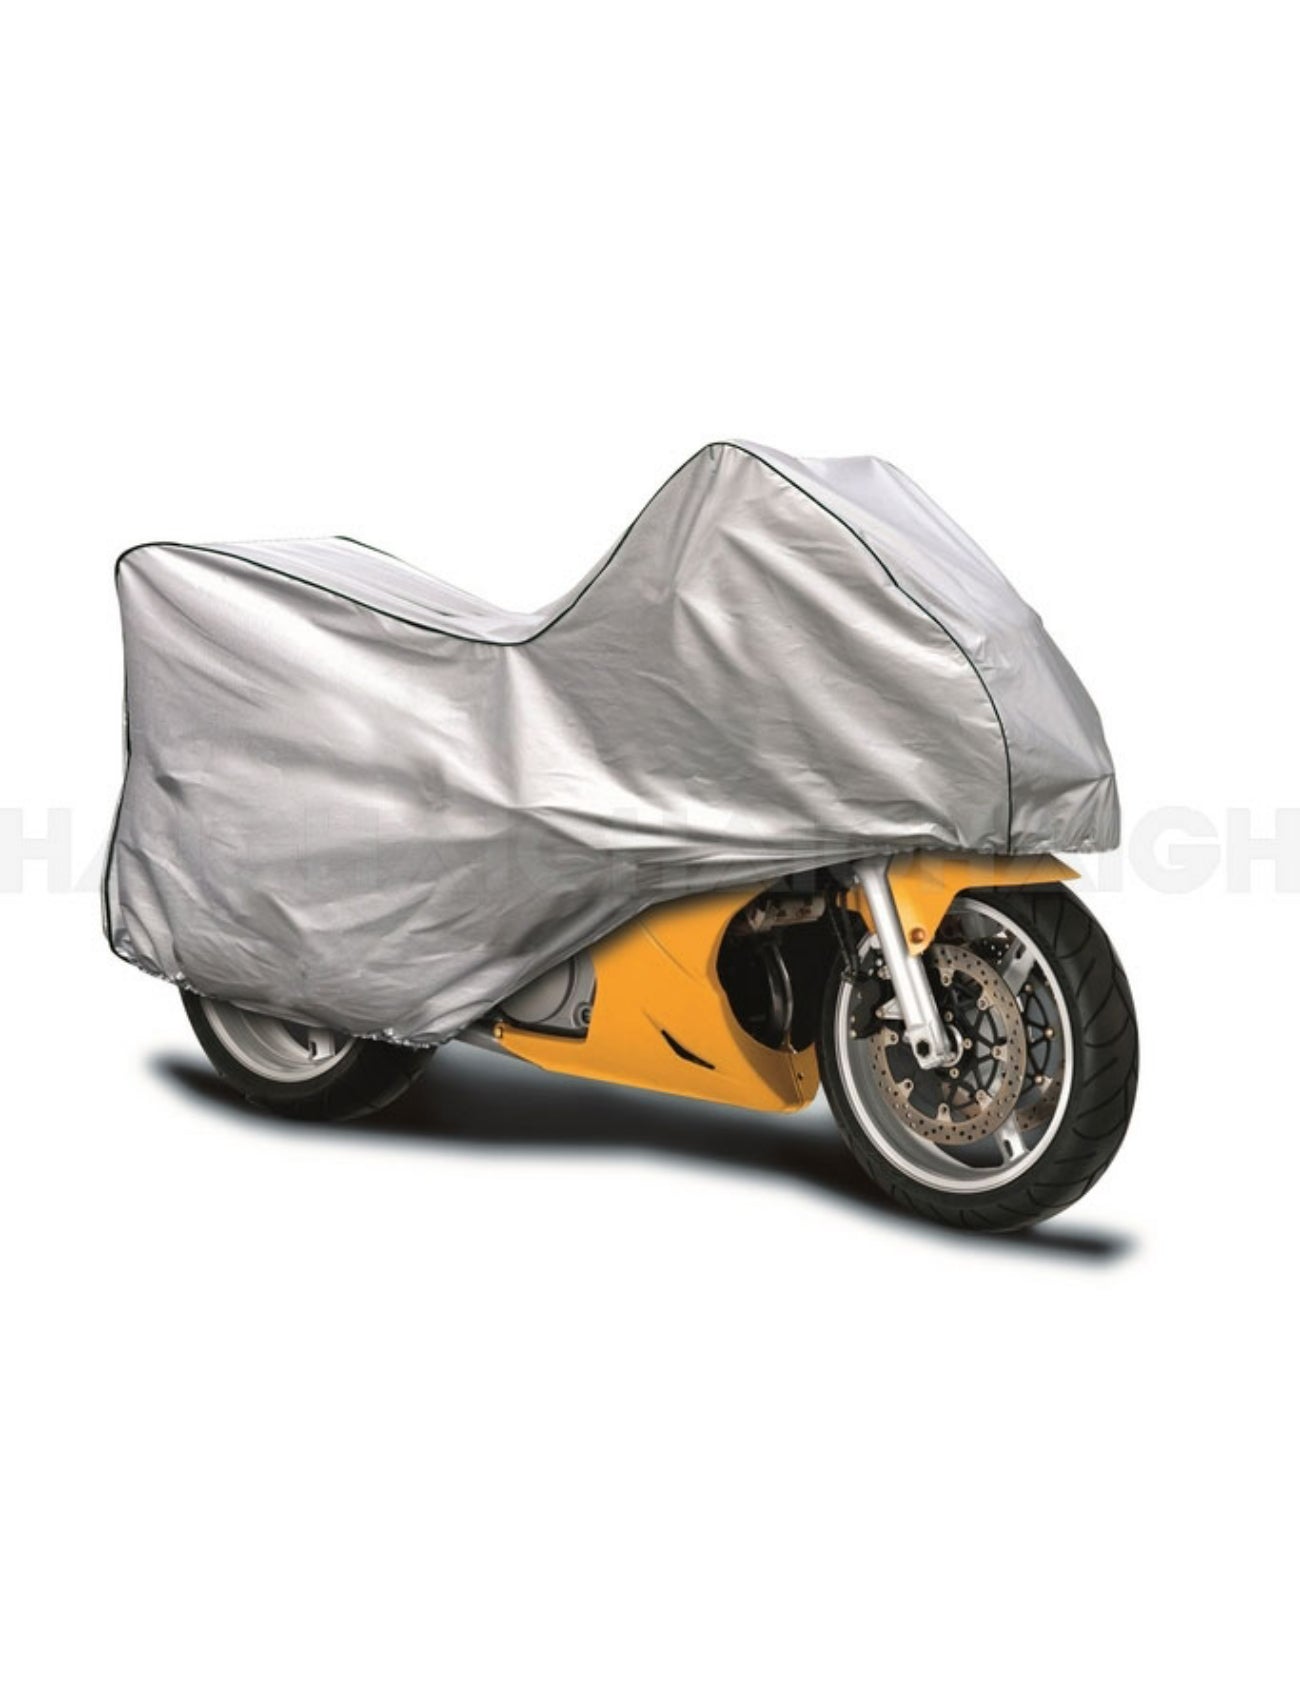 MOTORCYCLE COVER PRESTIGE TO 500CC